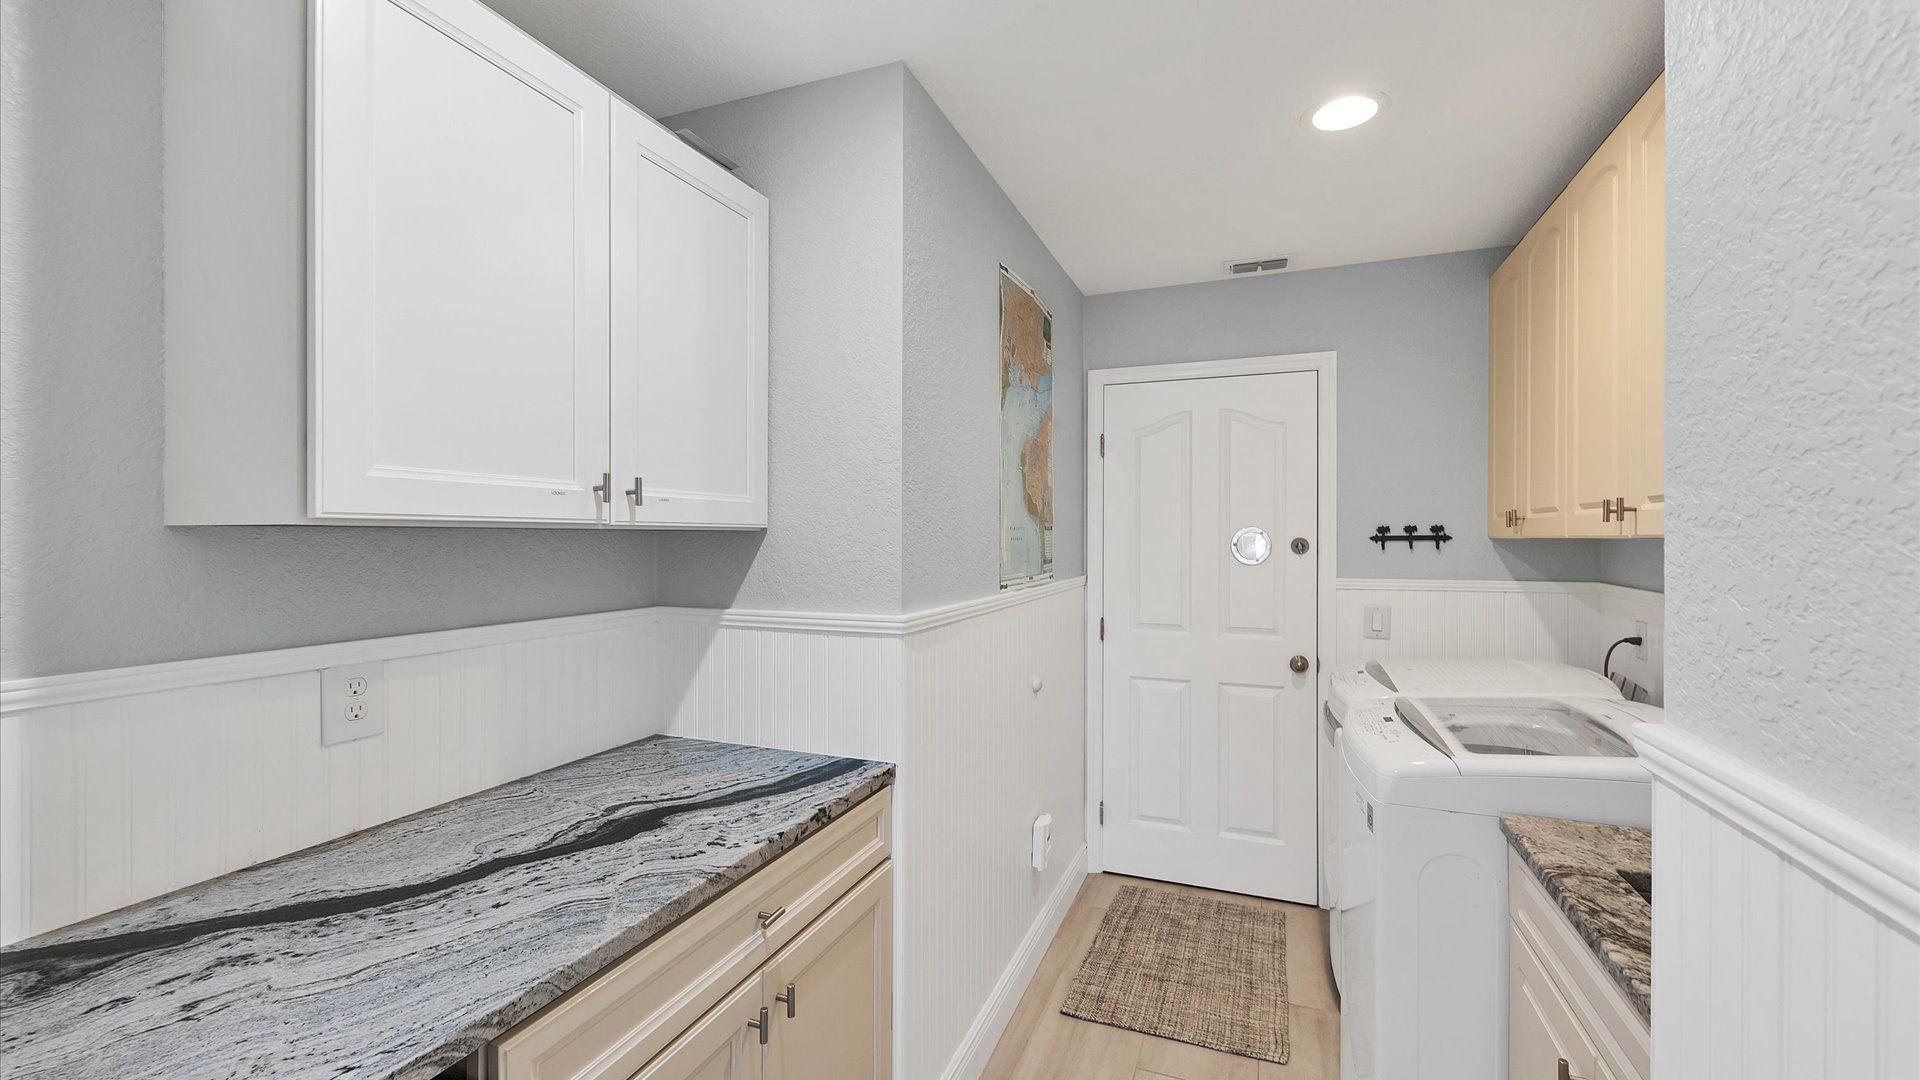 Full size laundry room leads to garage